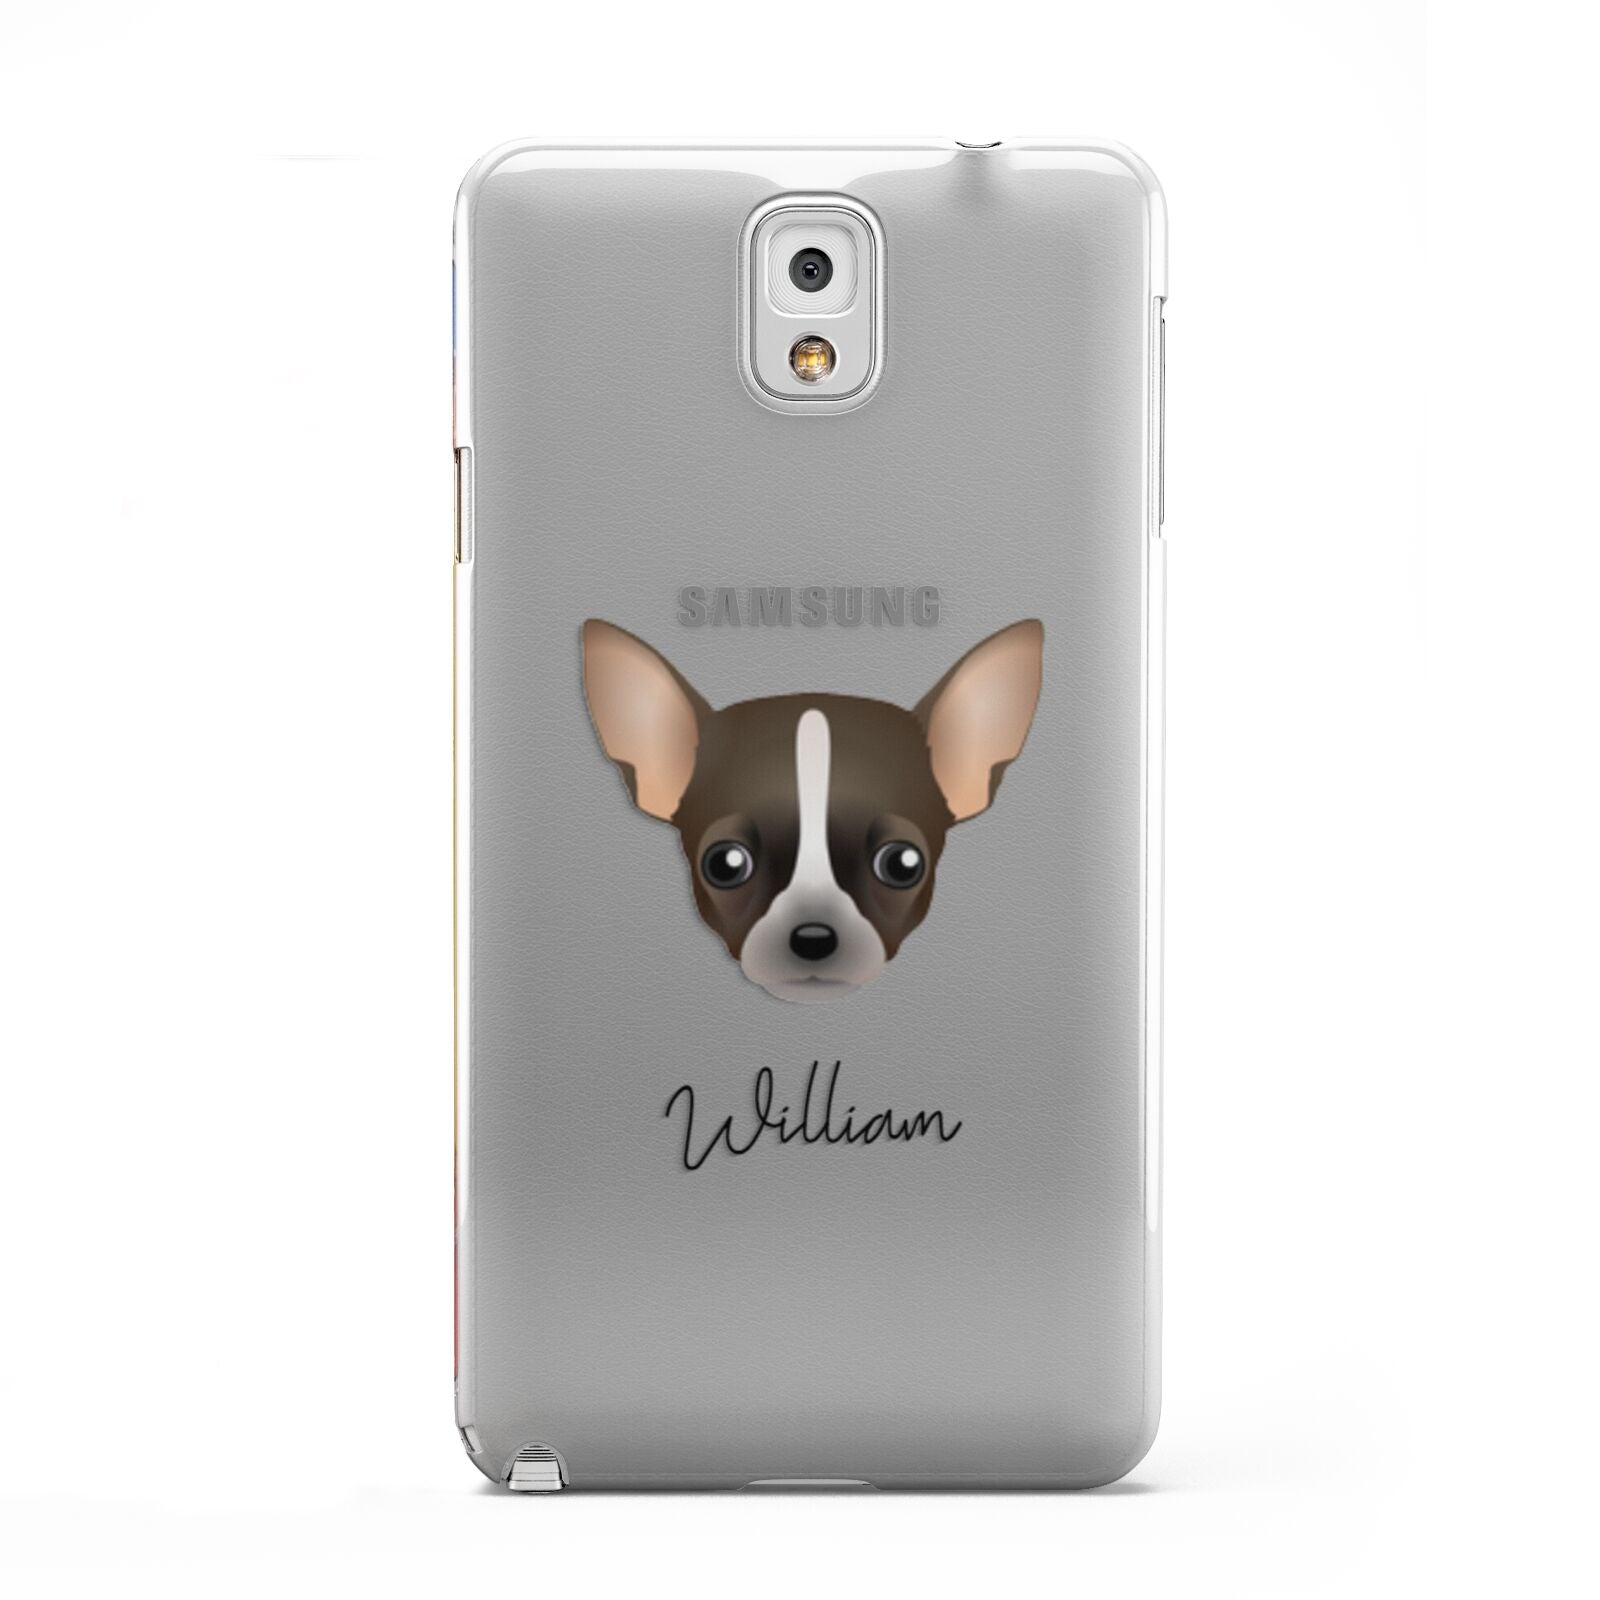 Chihuahua Personalised Samsung Galaxy Note 3 Case